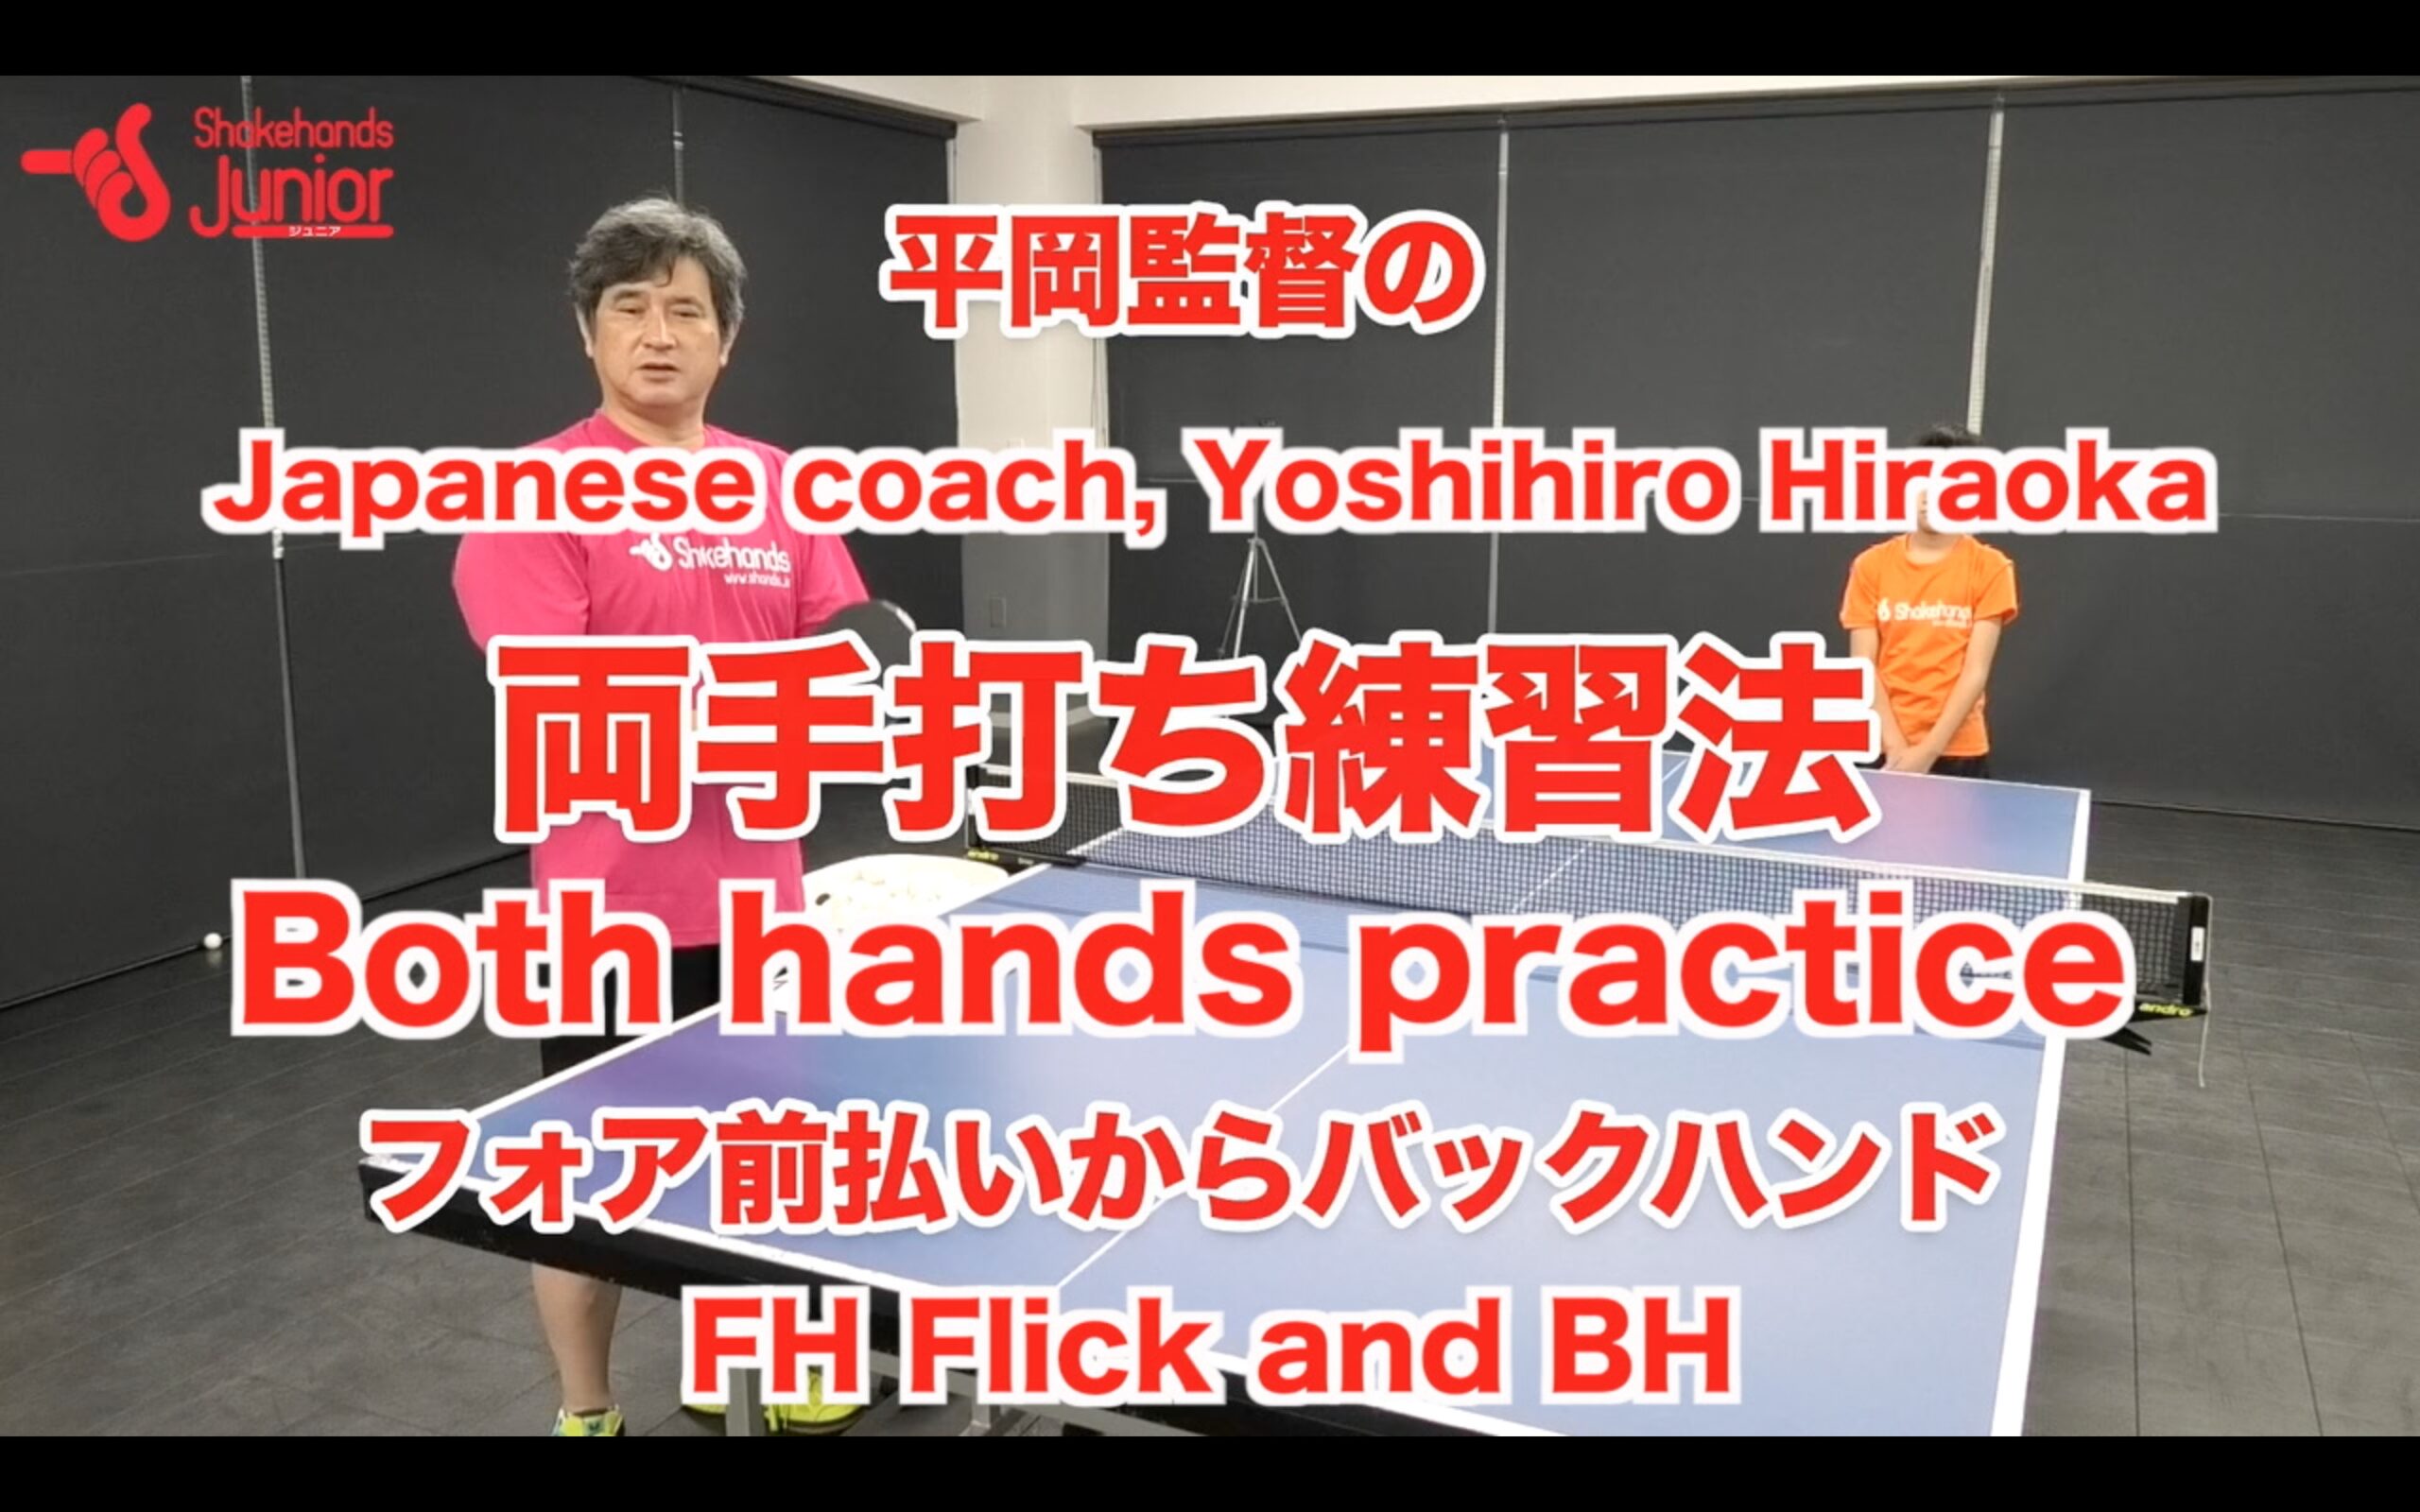 Both hands practice FH flick and BH